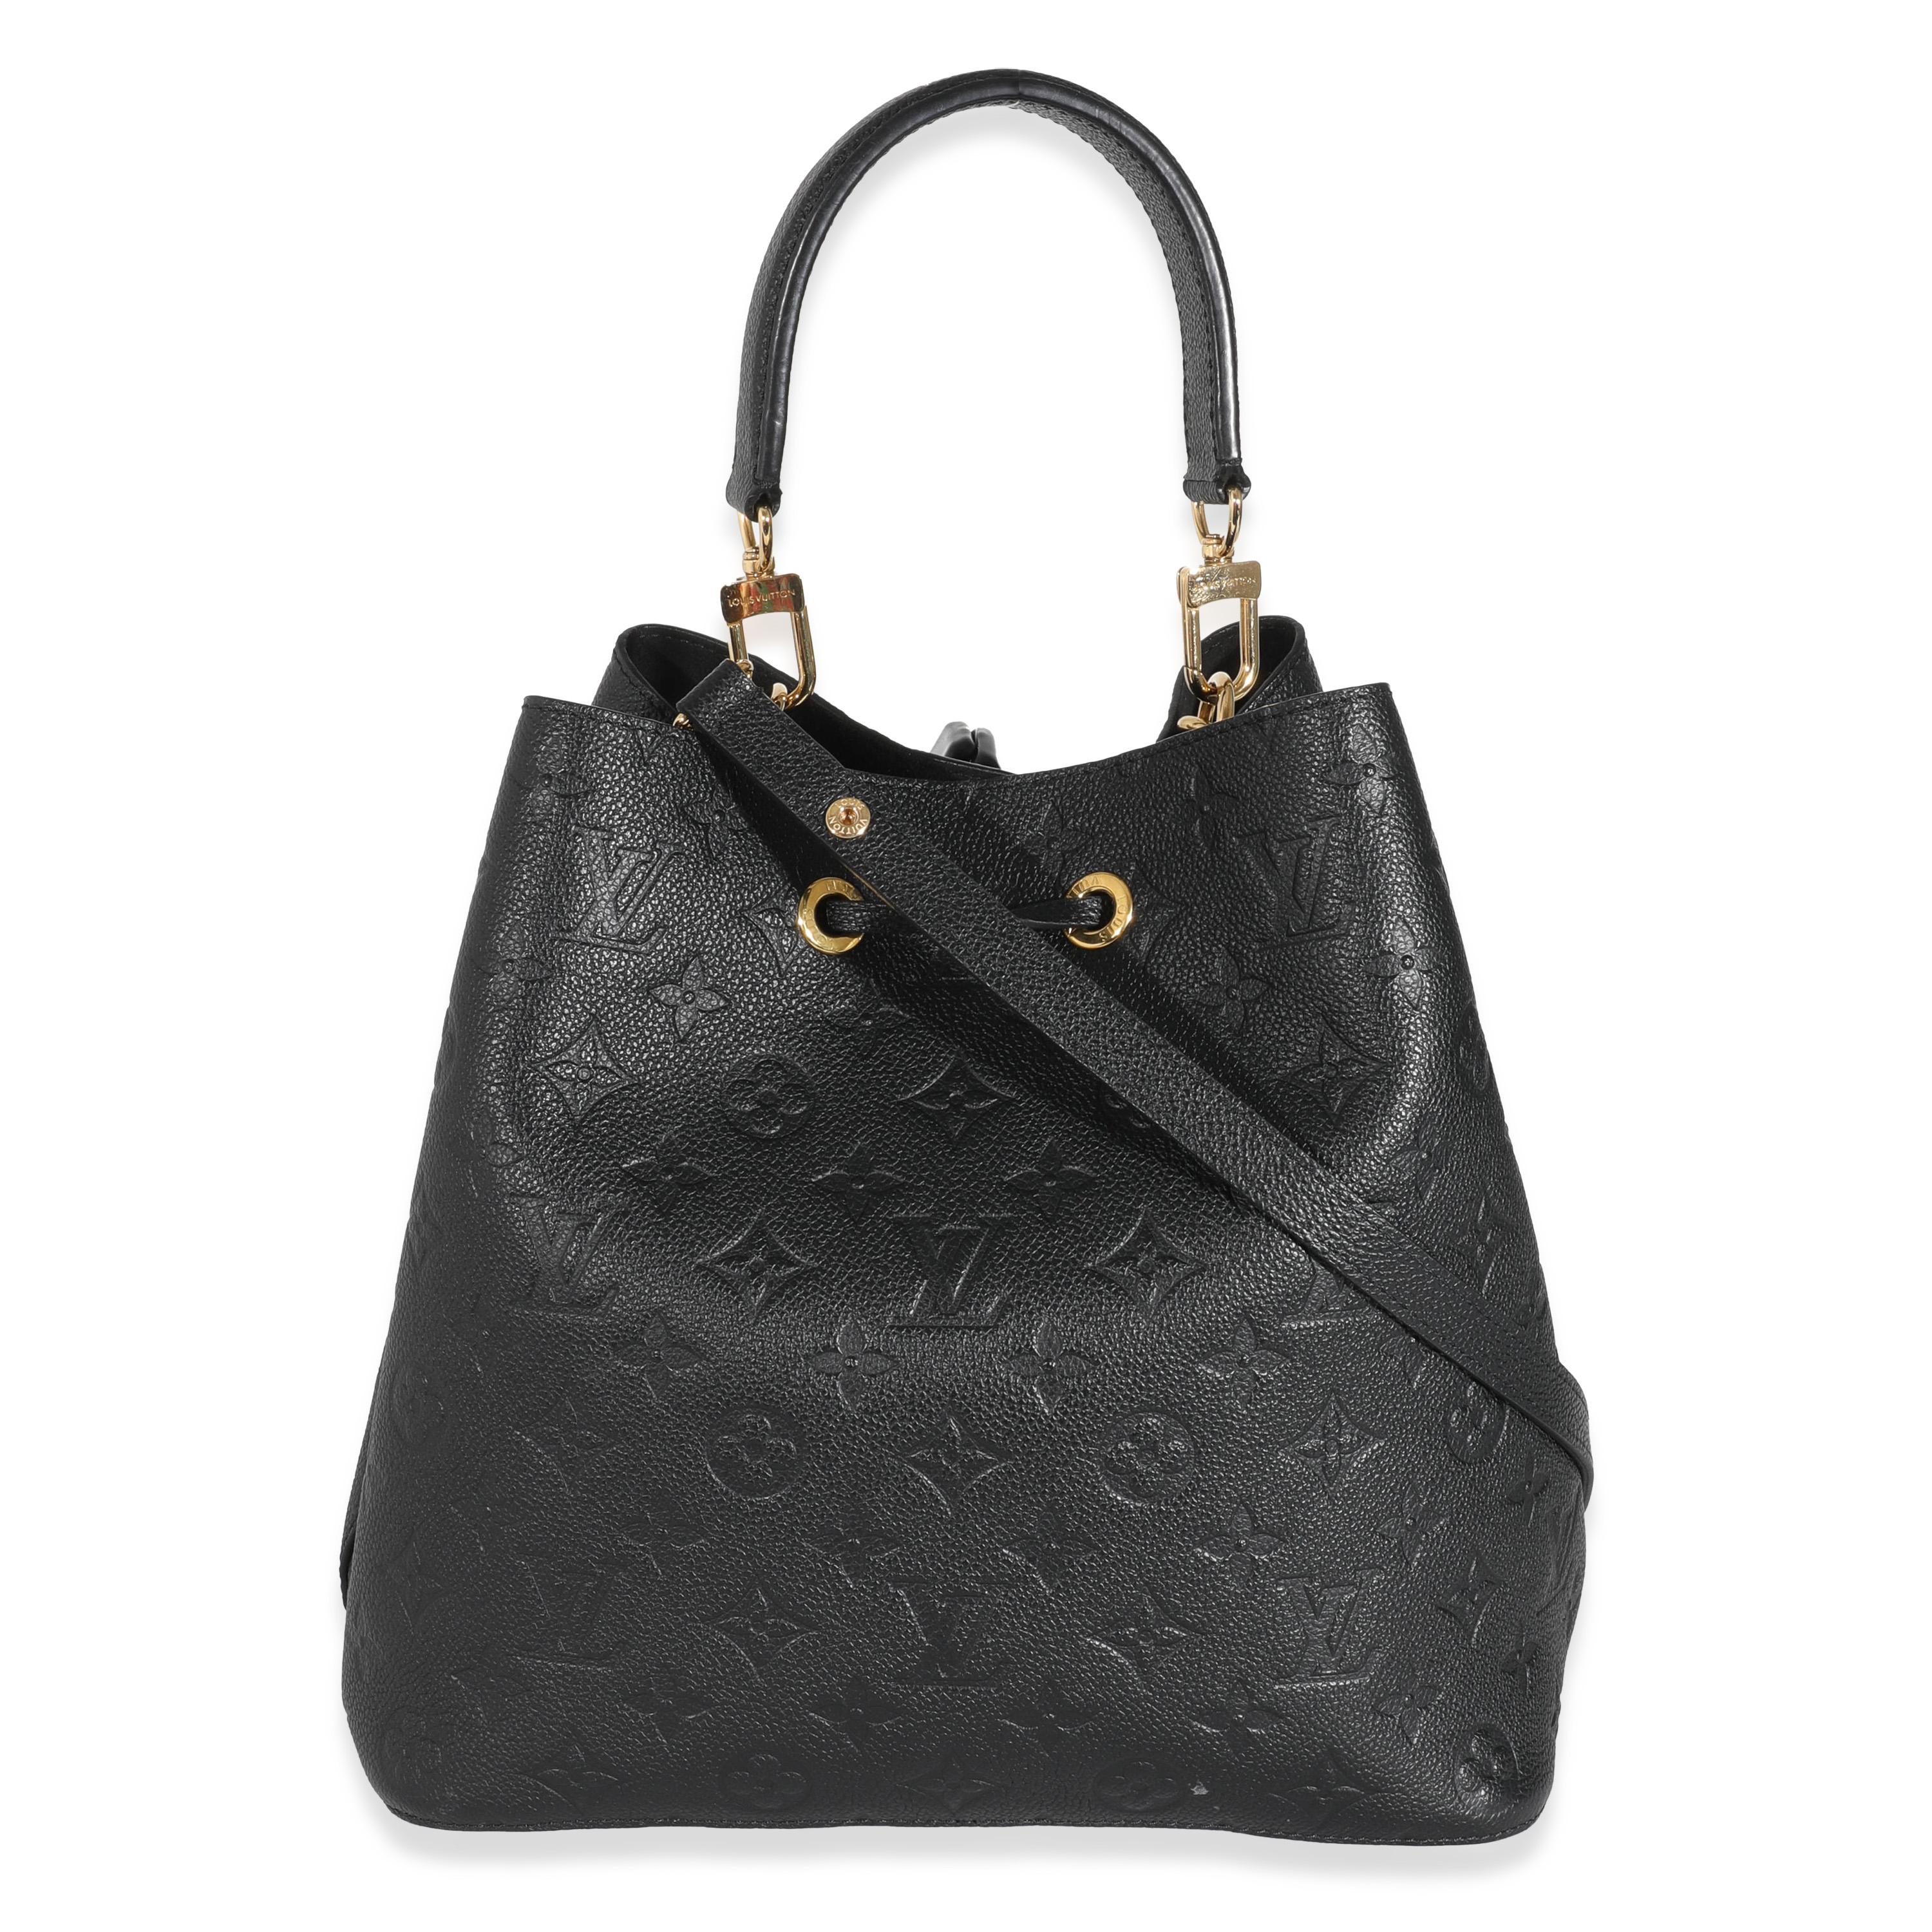 Listing Title: Louis Vuitton Black Monogram Empreinte NéoNoé MM
SKU: 132059
MSRP: 2710.00
Condition: Pre-owned 
Condition Description: Louis Vuitton's Noé bucket bag is a reworked version of one of the House's designs from 1932. Originally created